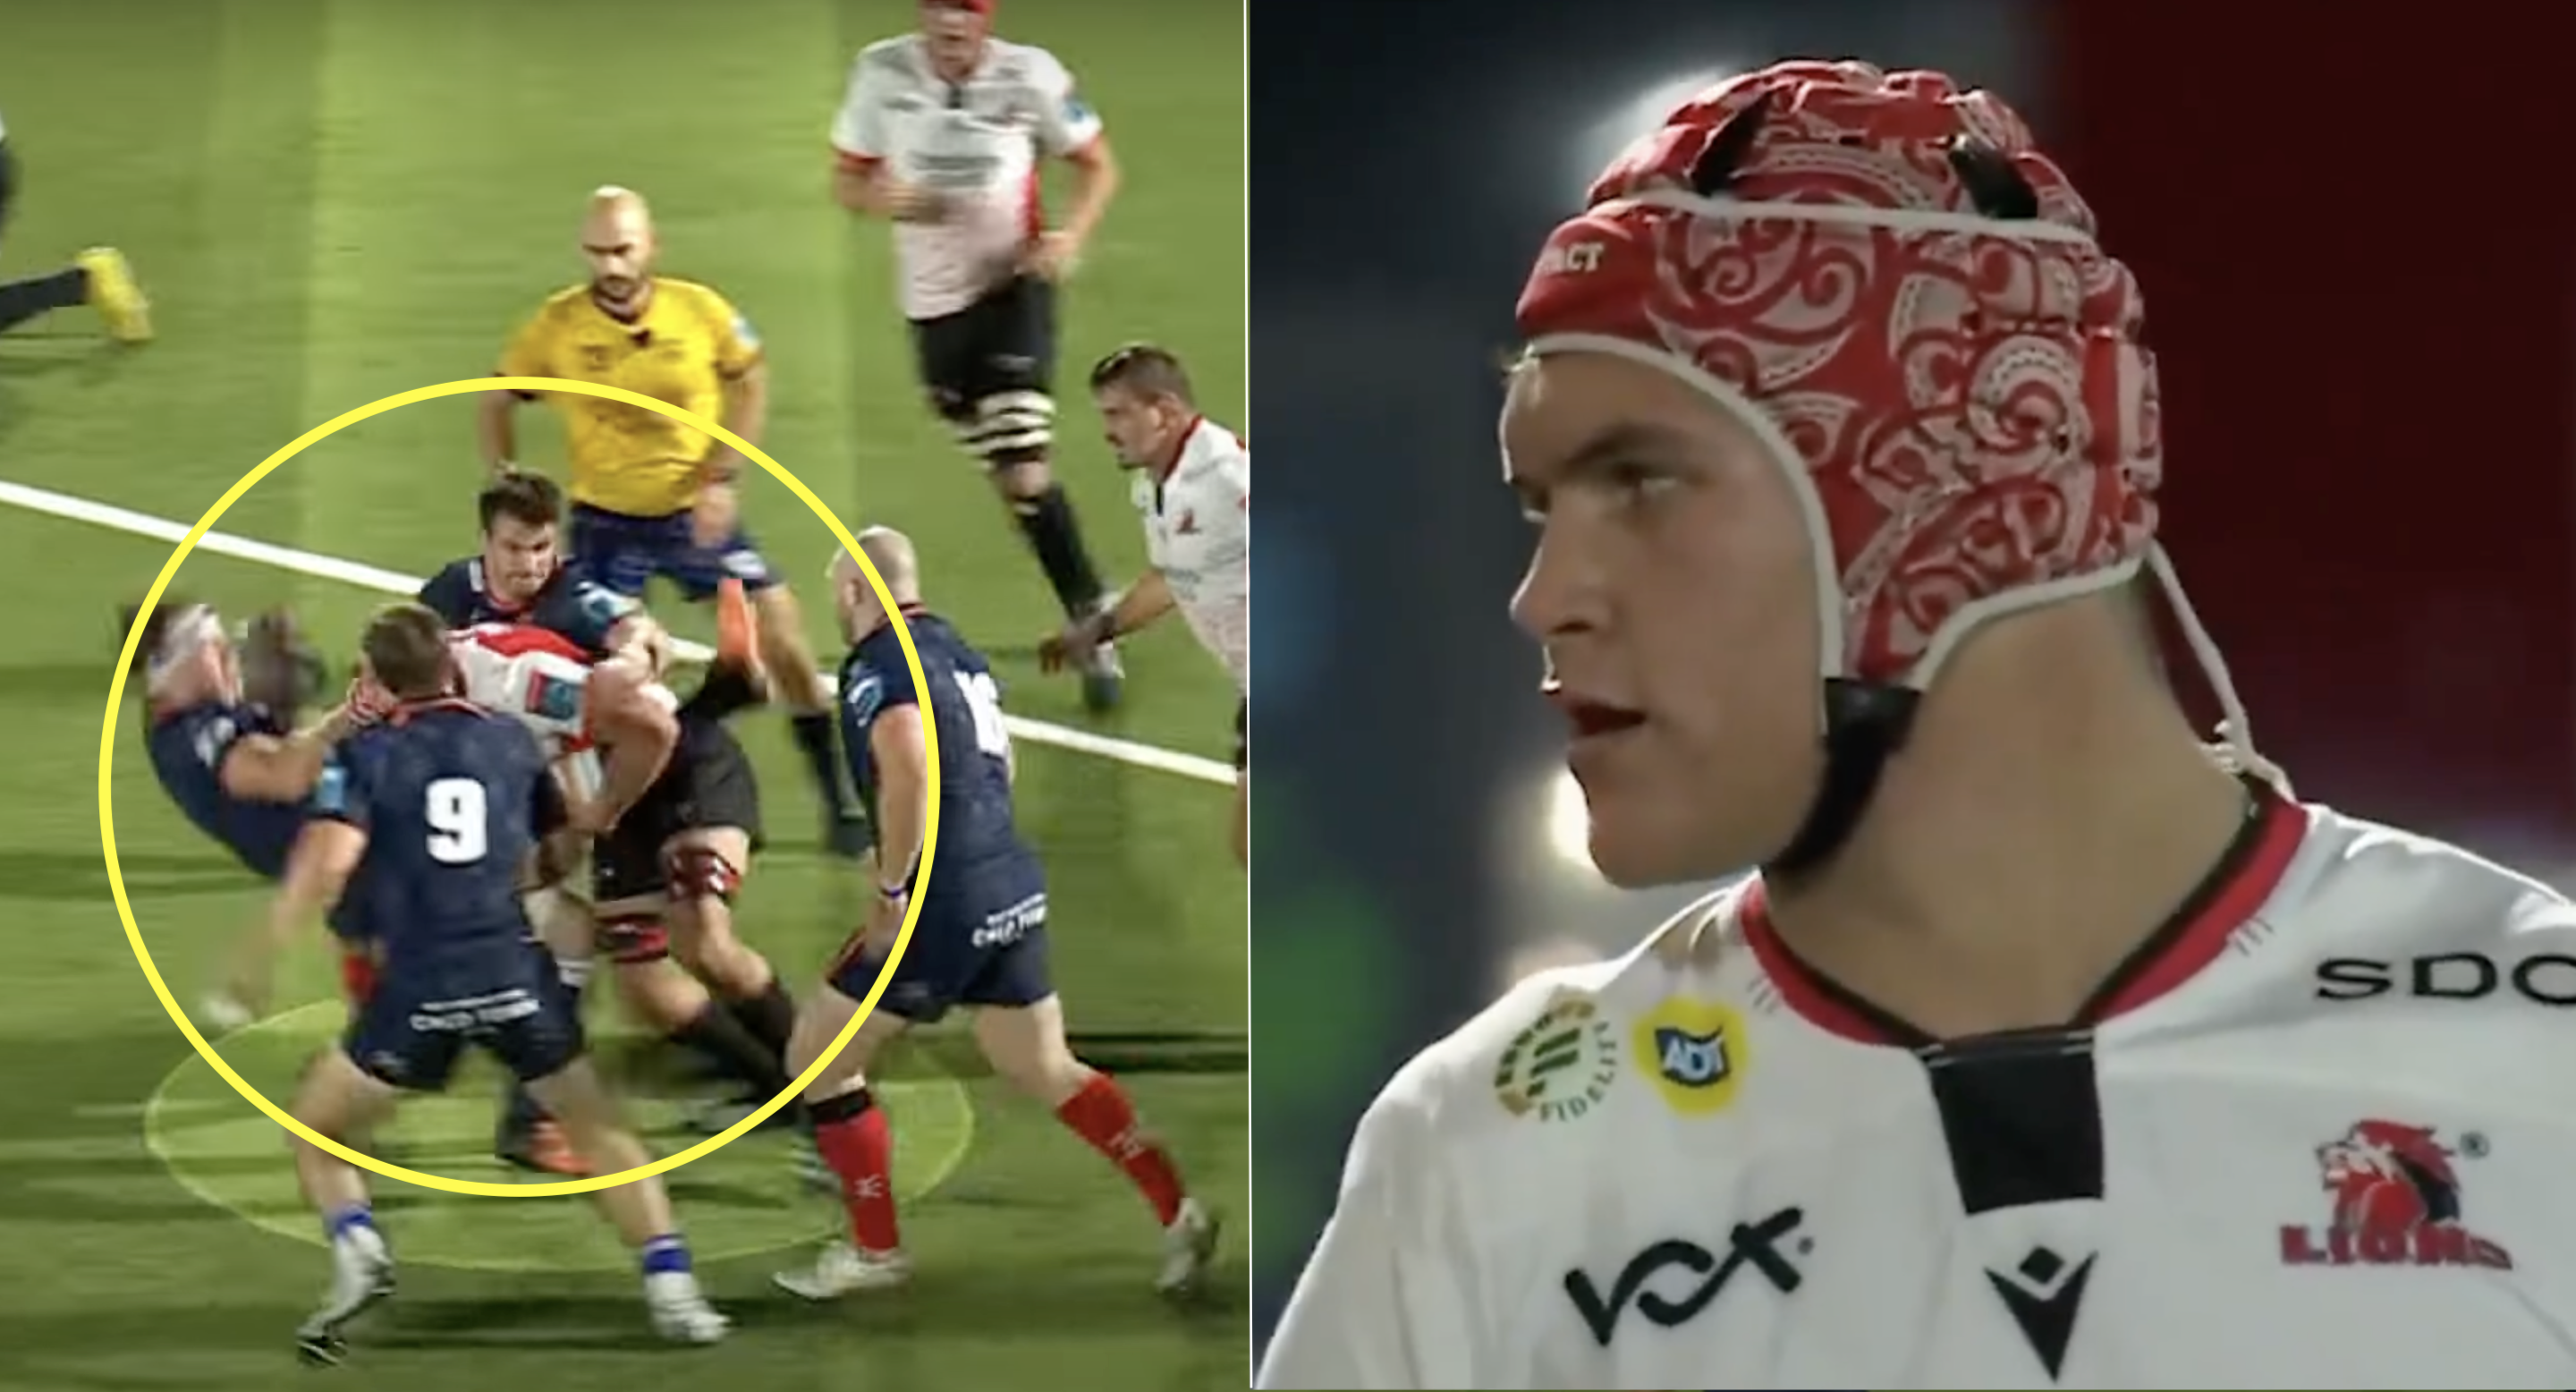 Lions' 120kg, 19-year-old Junior Bok demolishes one of NH's strongest carriers